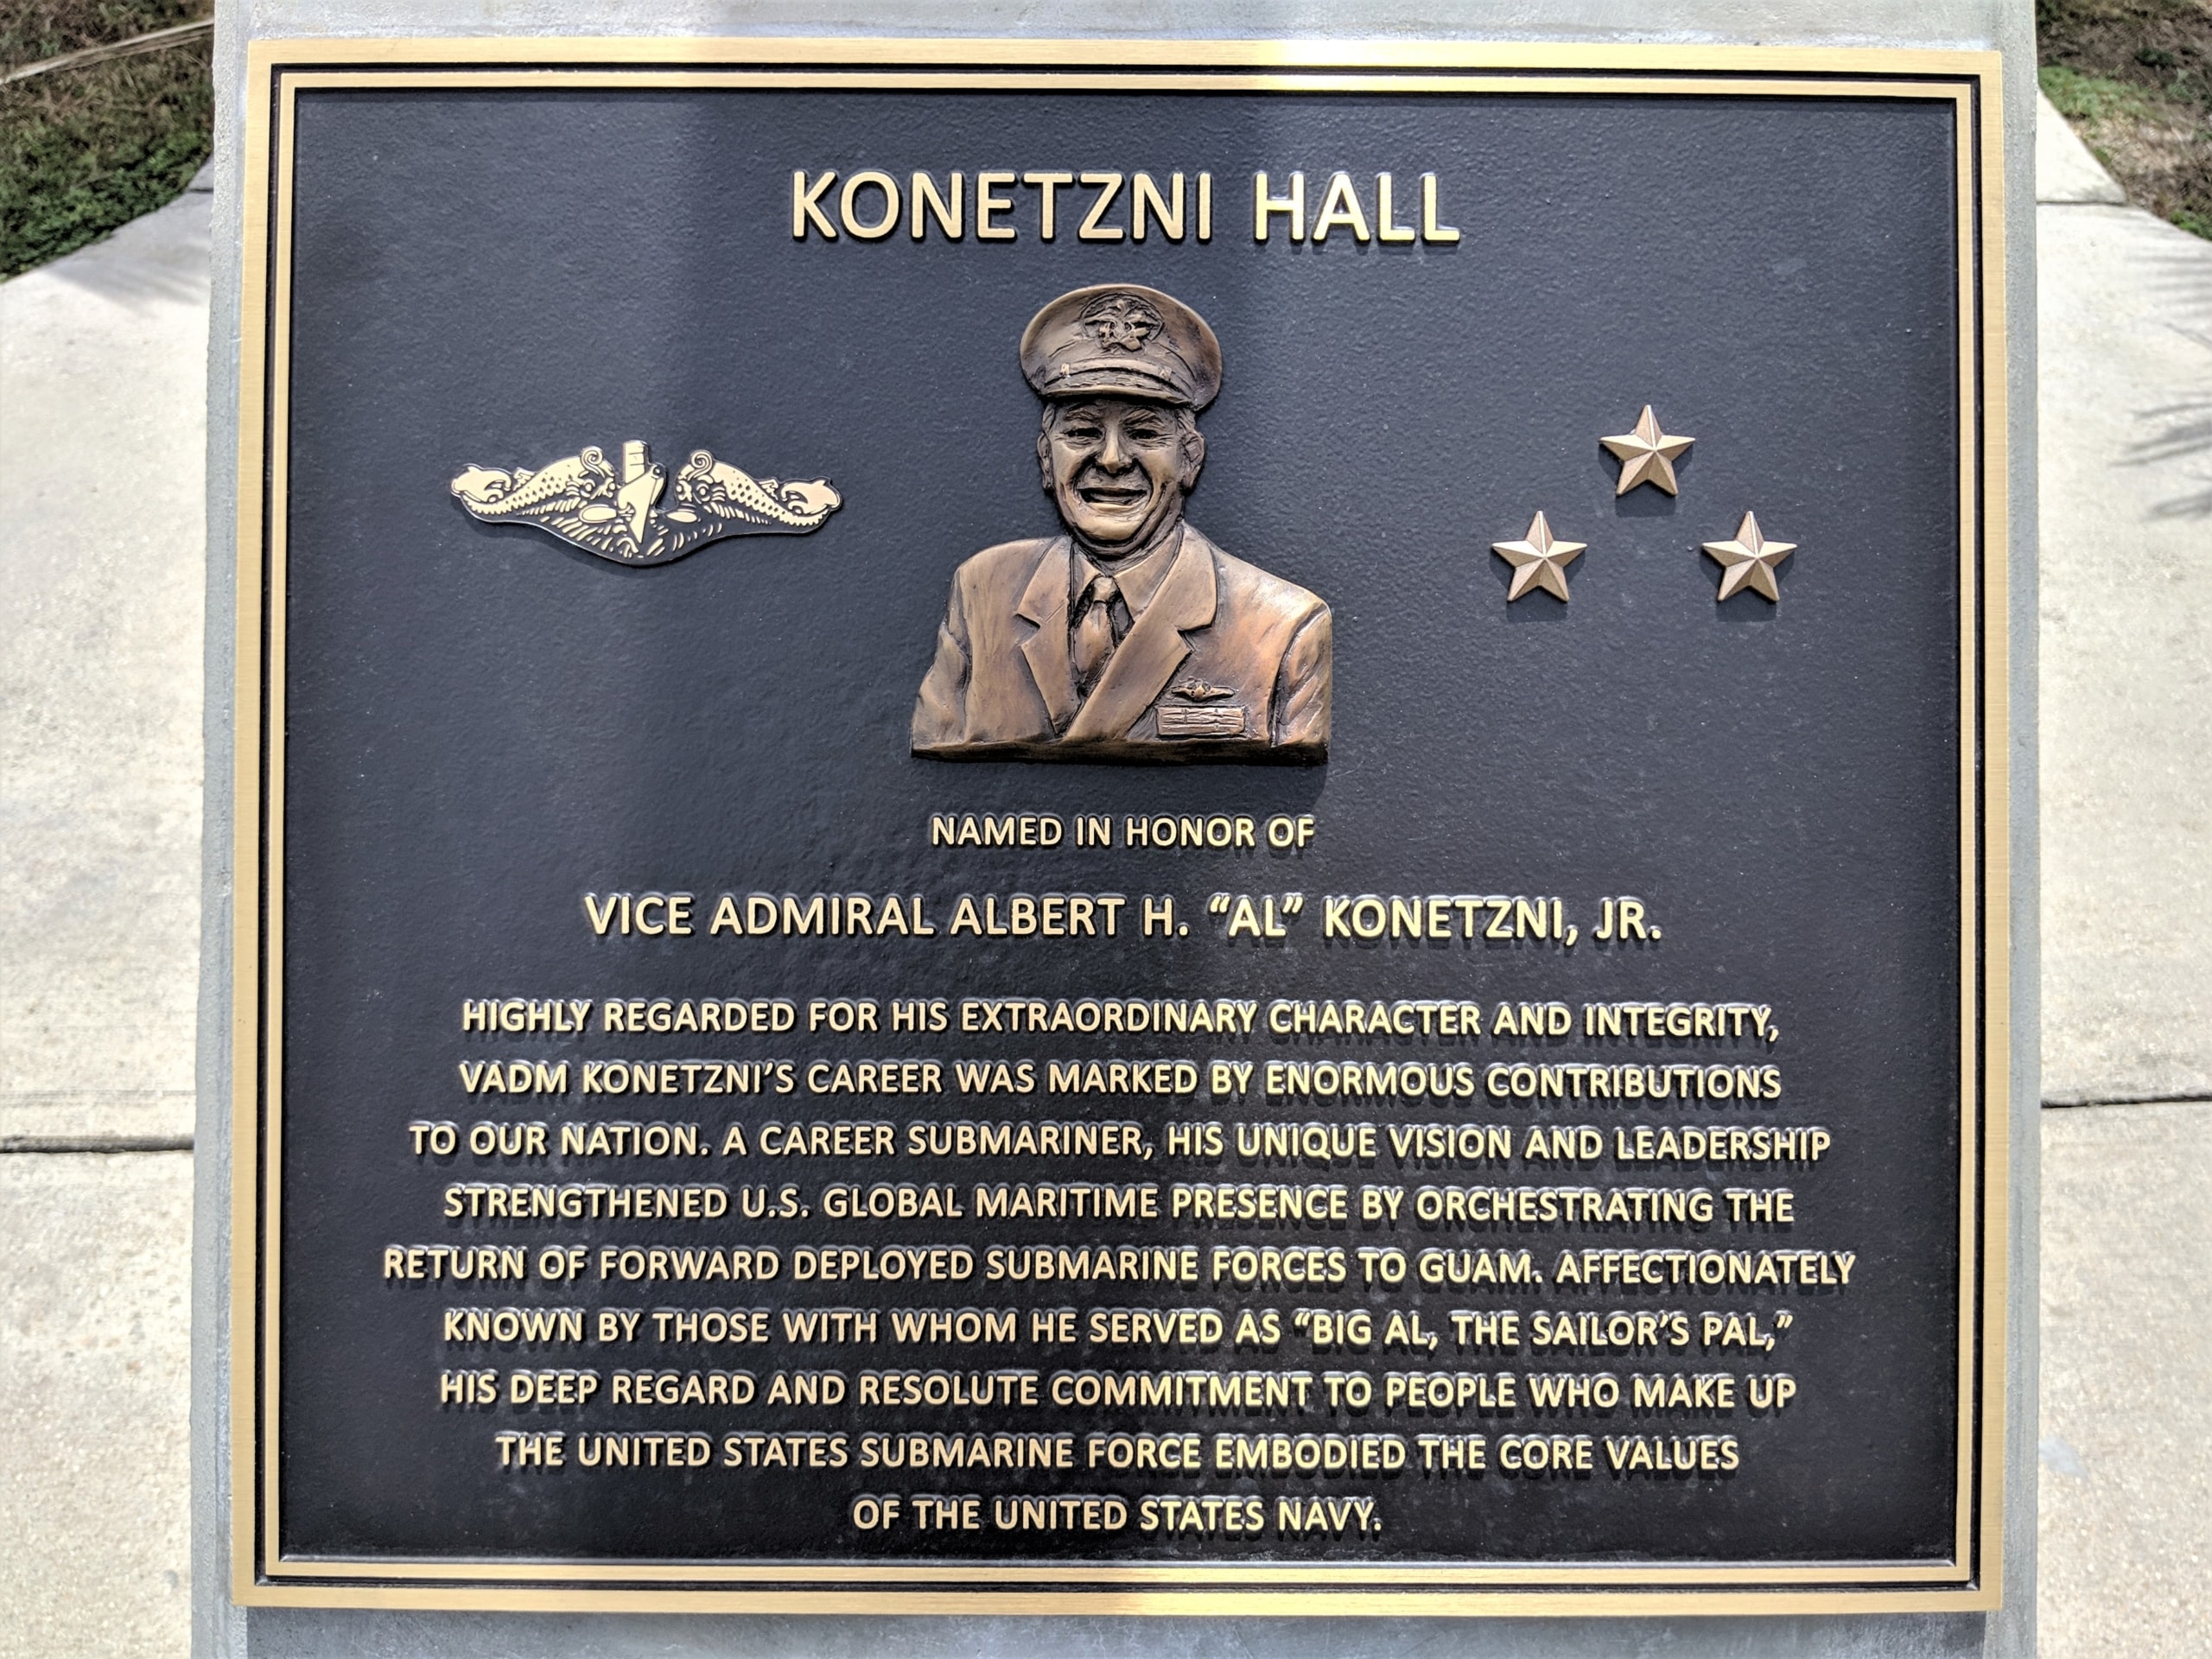 A bas relief cast bronze plaque in honor of U.S. Navy veteran Vice Admiral Albert H. Konetzni, Jr. A likeness of the Vice Admiral is present on the plaque.